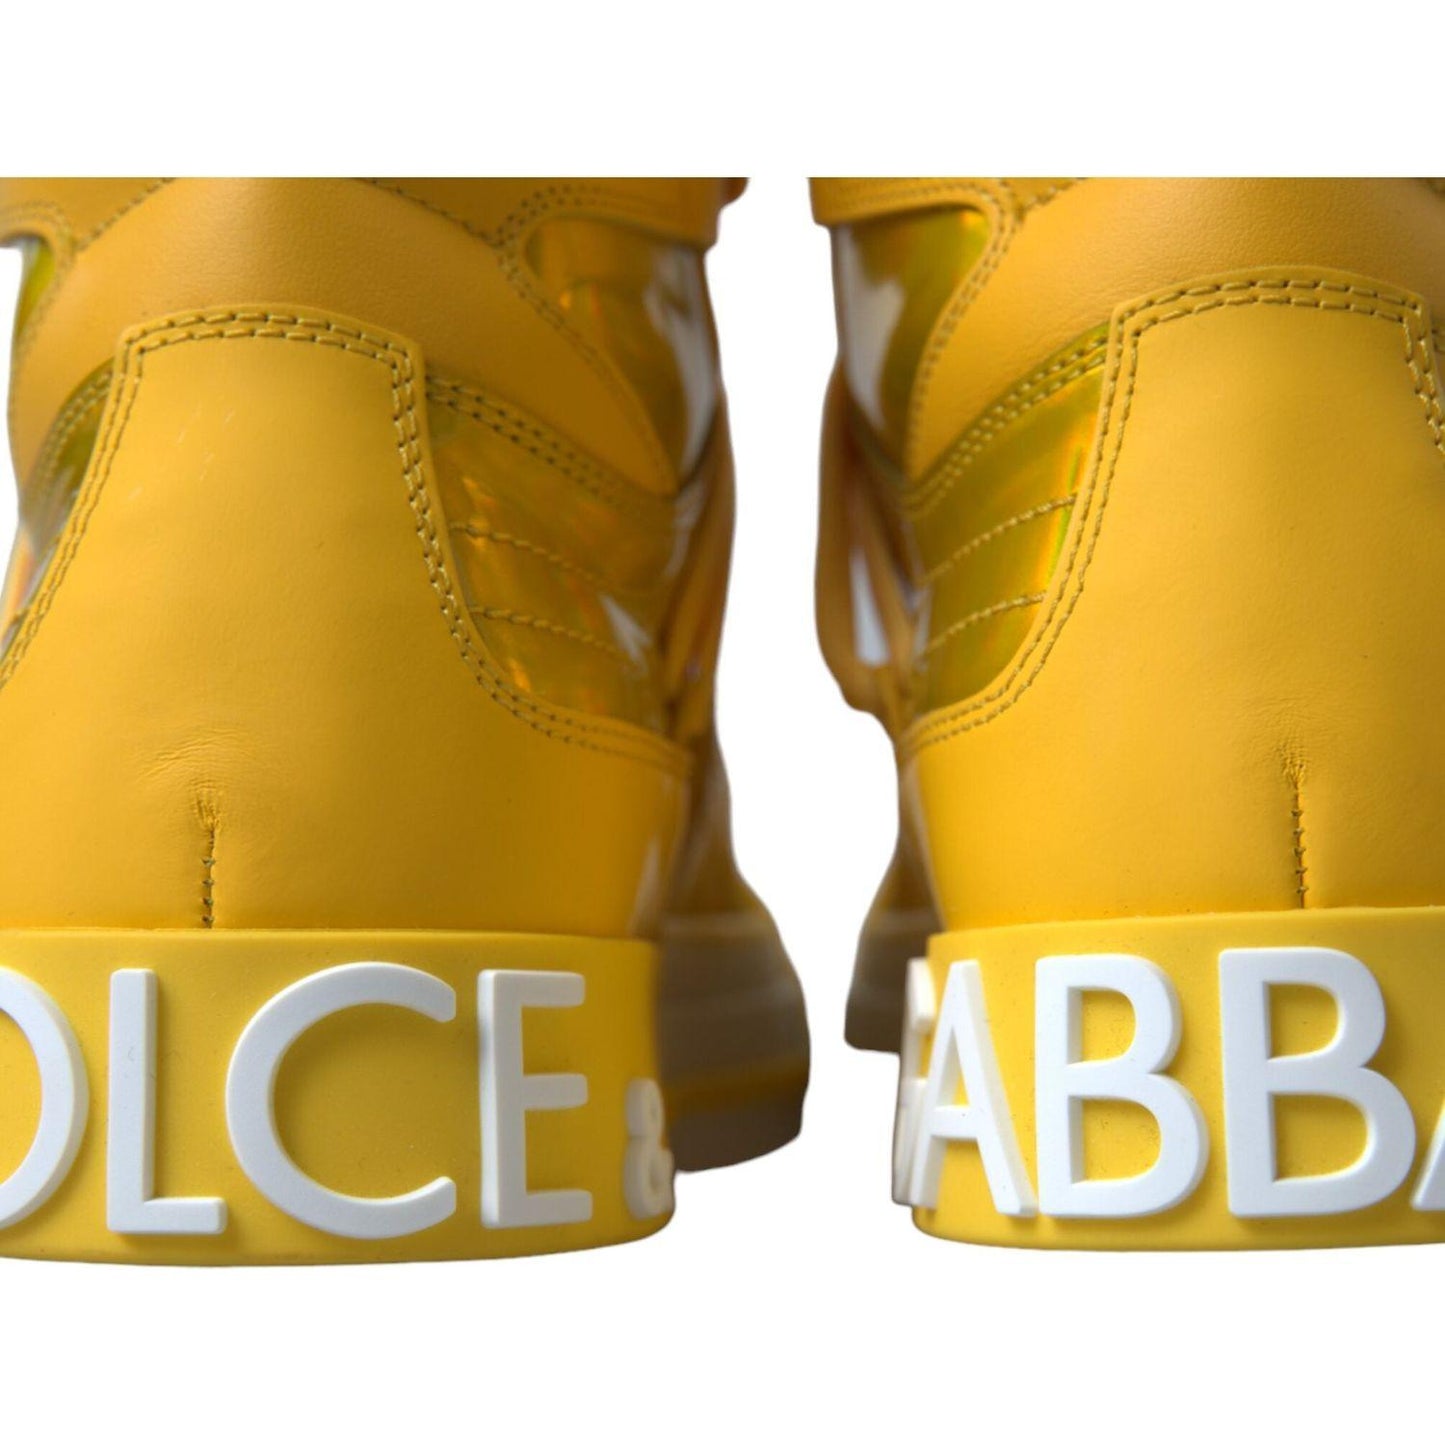 Dolce & Gabbana Chic High-Top Color-Block Sneakers yellow-white-leather-high-top-sneakers-shoes 465A2112-BG-scaled-6bdc9522-45c.jpg